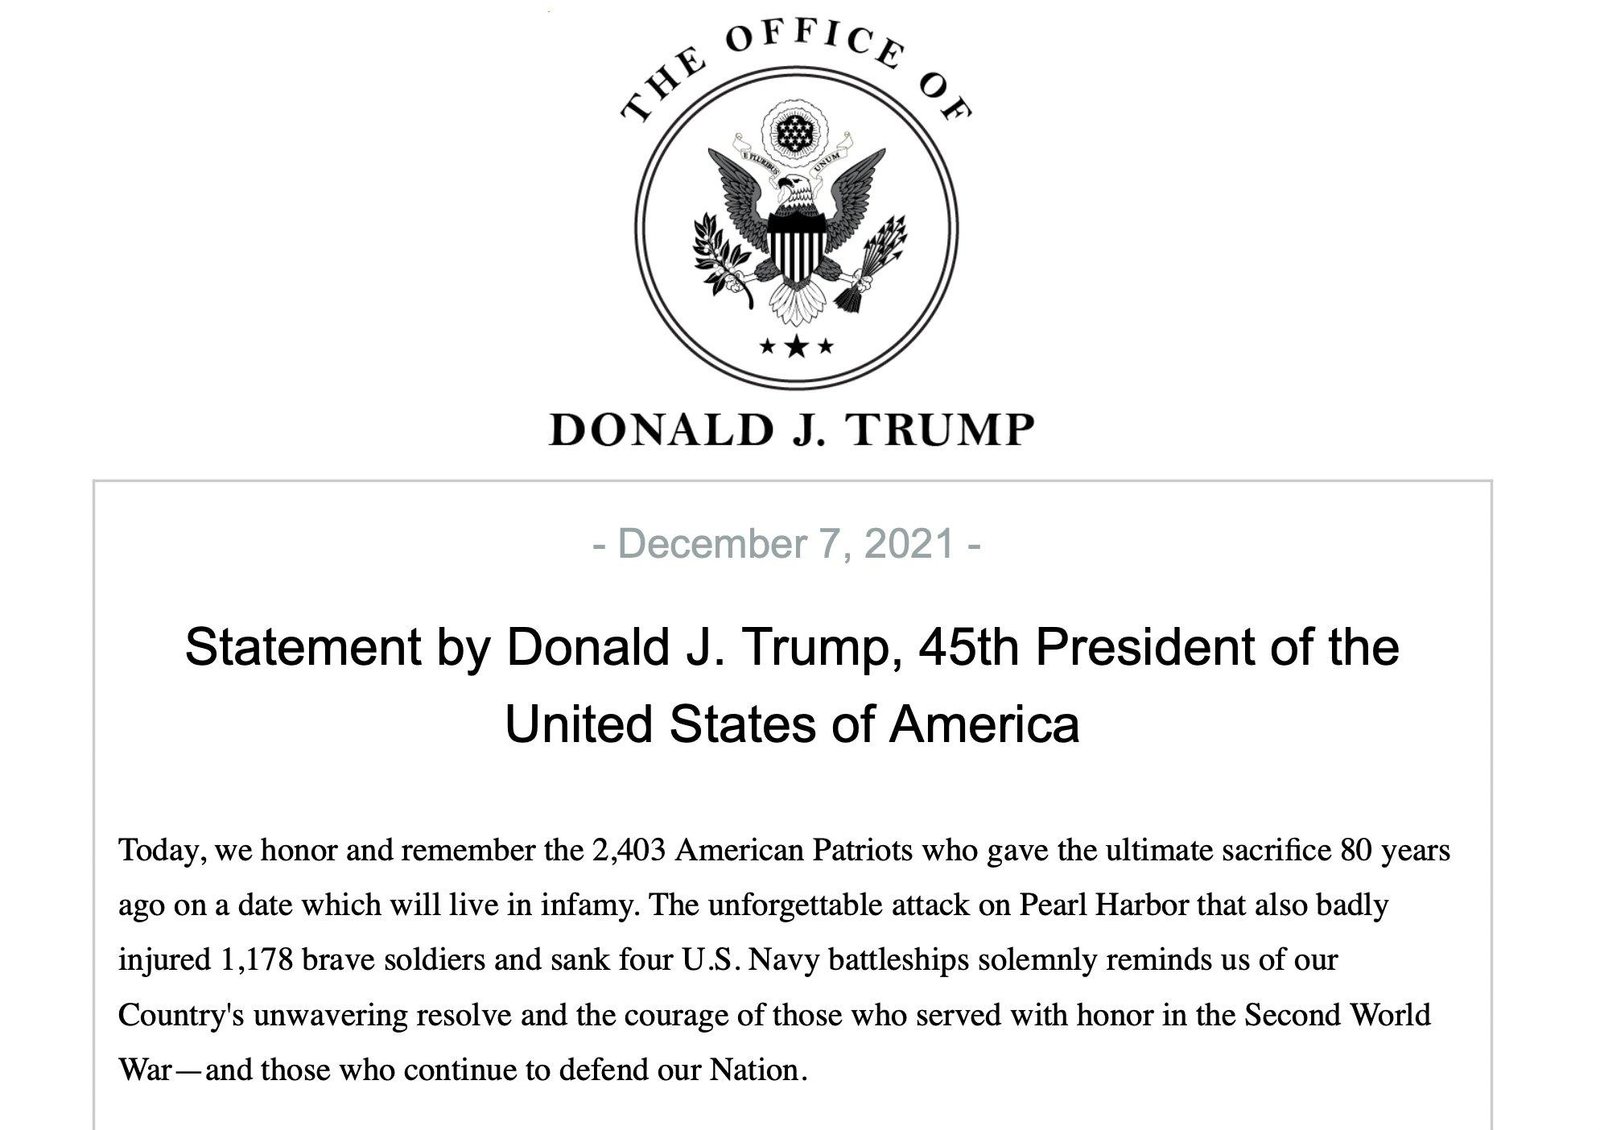 GEOTUS's Commemoration of Pearl Harbor – TheDonald